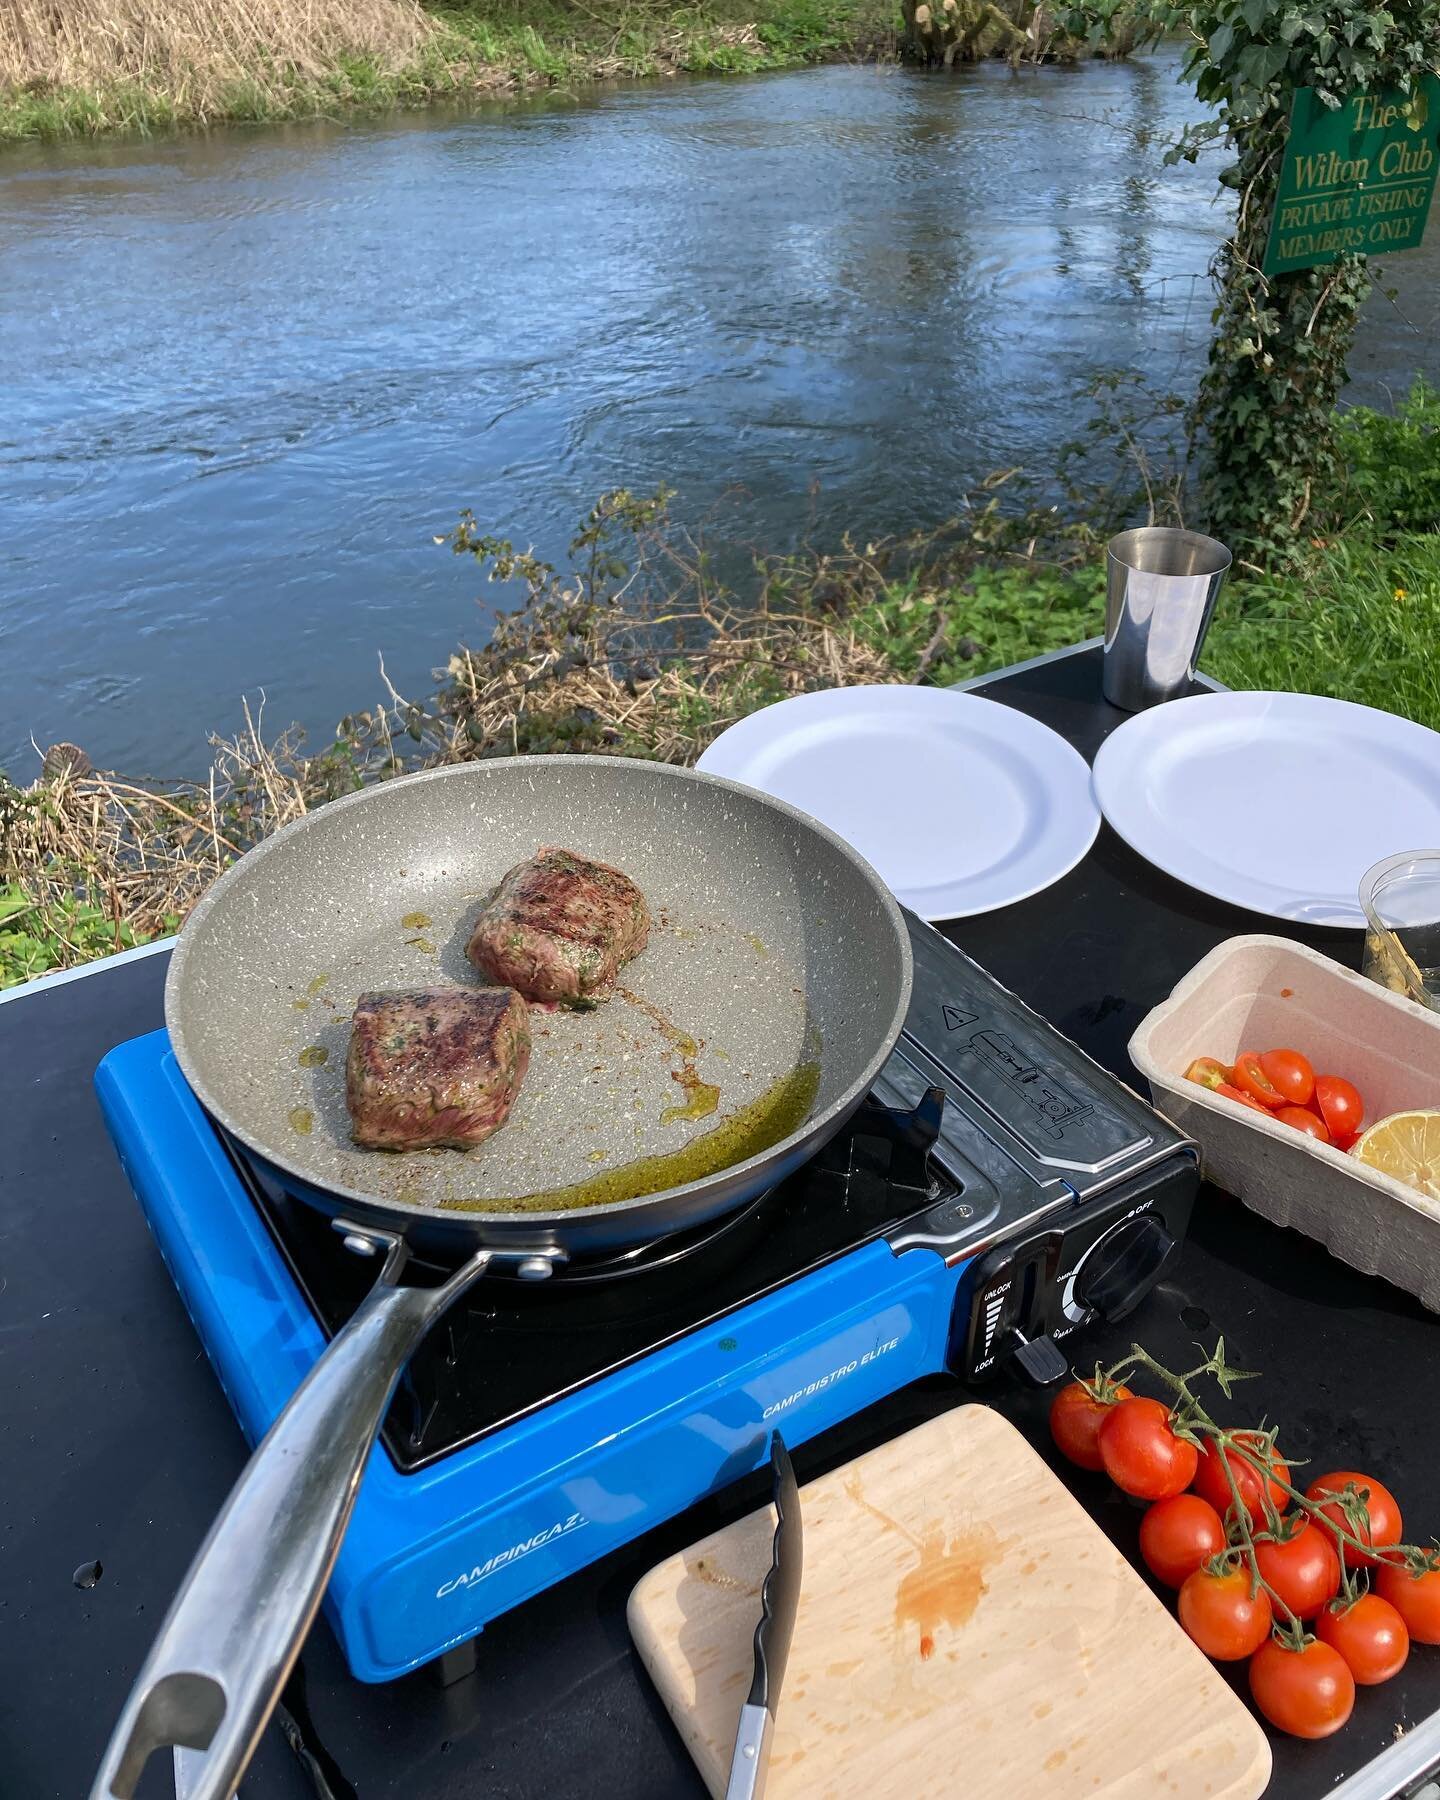 Riverside Easter 🐣 lunch - delicious roe loin with wild garlic. There may not be much river activity but frankly who cares when there's a good picnic!! Happy Easter 🐣 #alfrescolunch #wildvenison #roevenison #easterpicnic #foodieontour #gamebird #ou